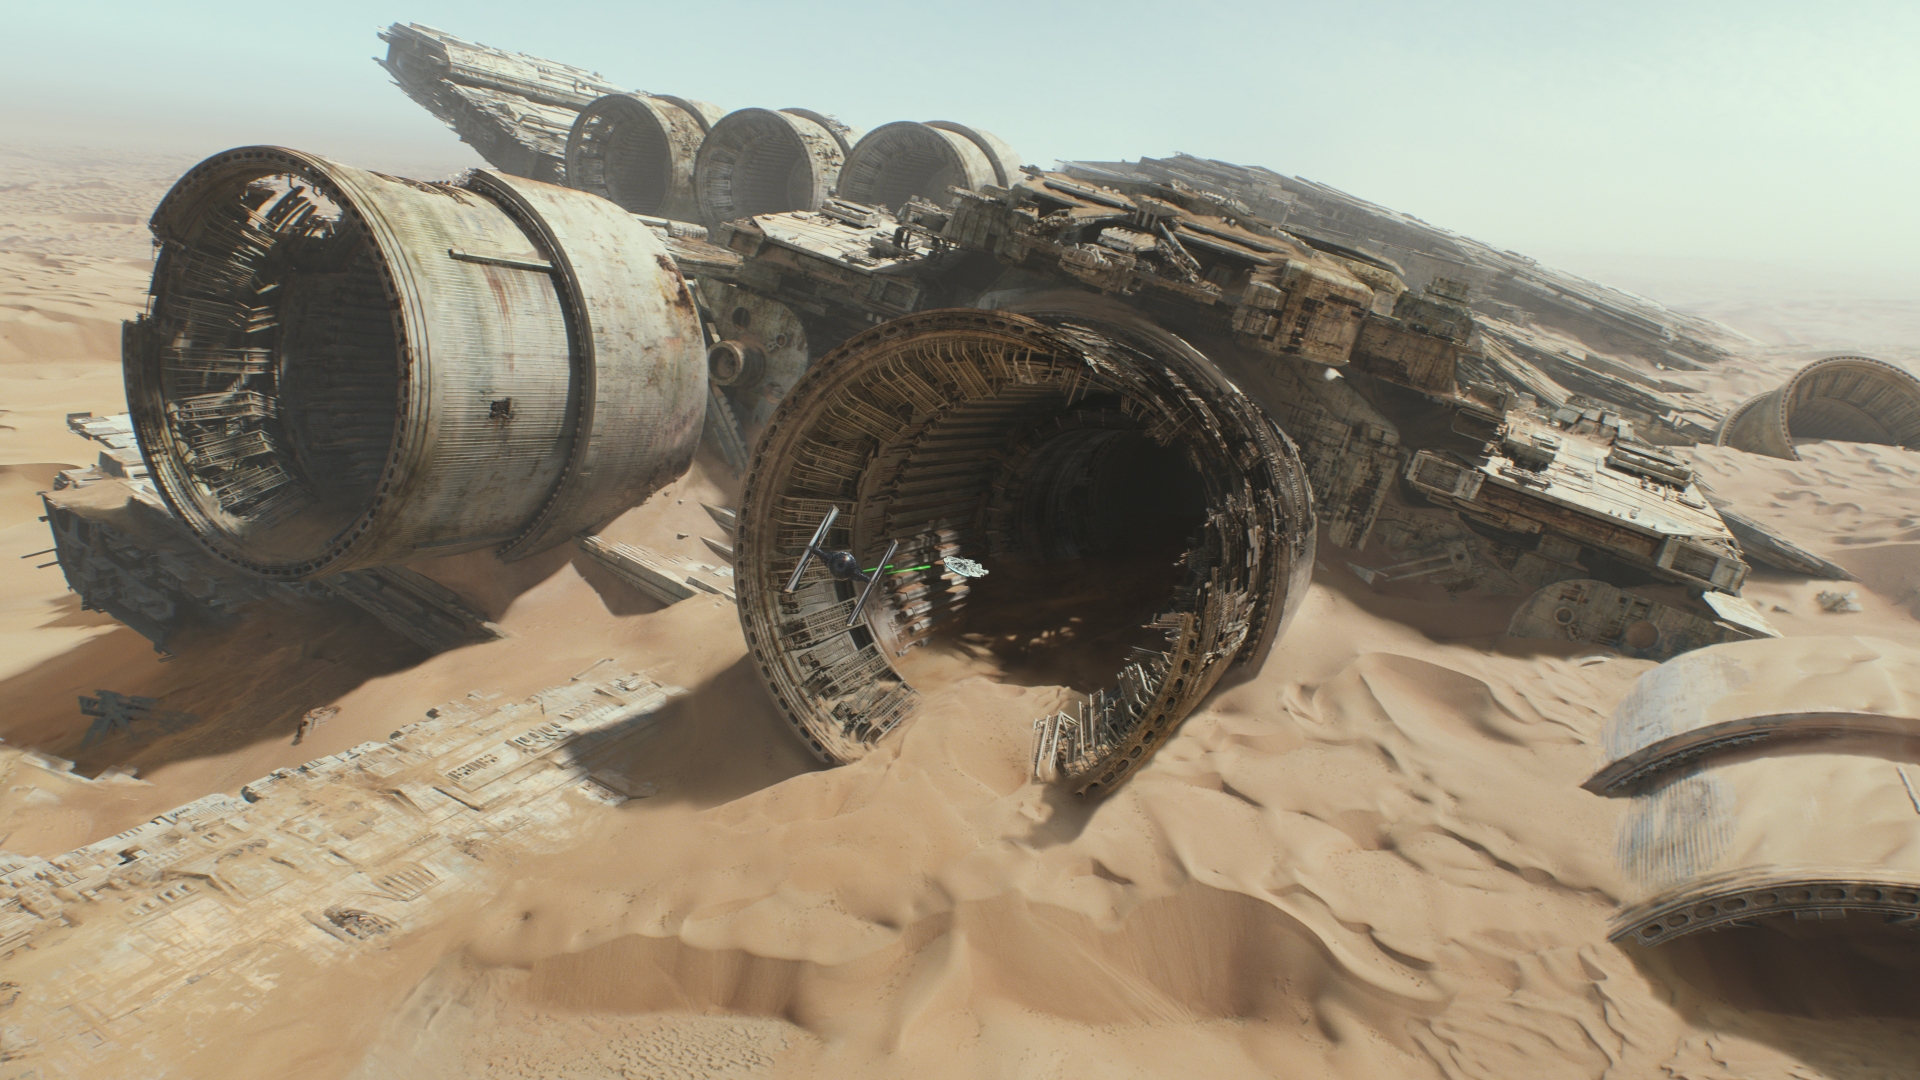 Star Wars The Force Awakens Ship for 1920 x 1080 HDTV 1080p resolution